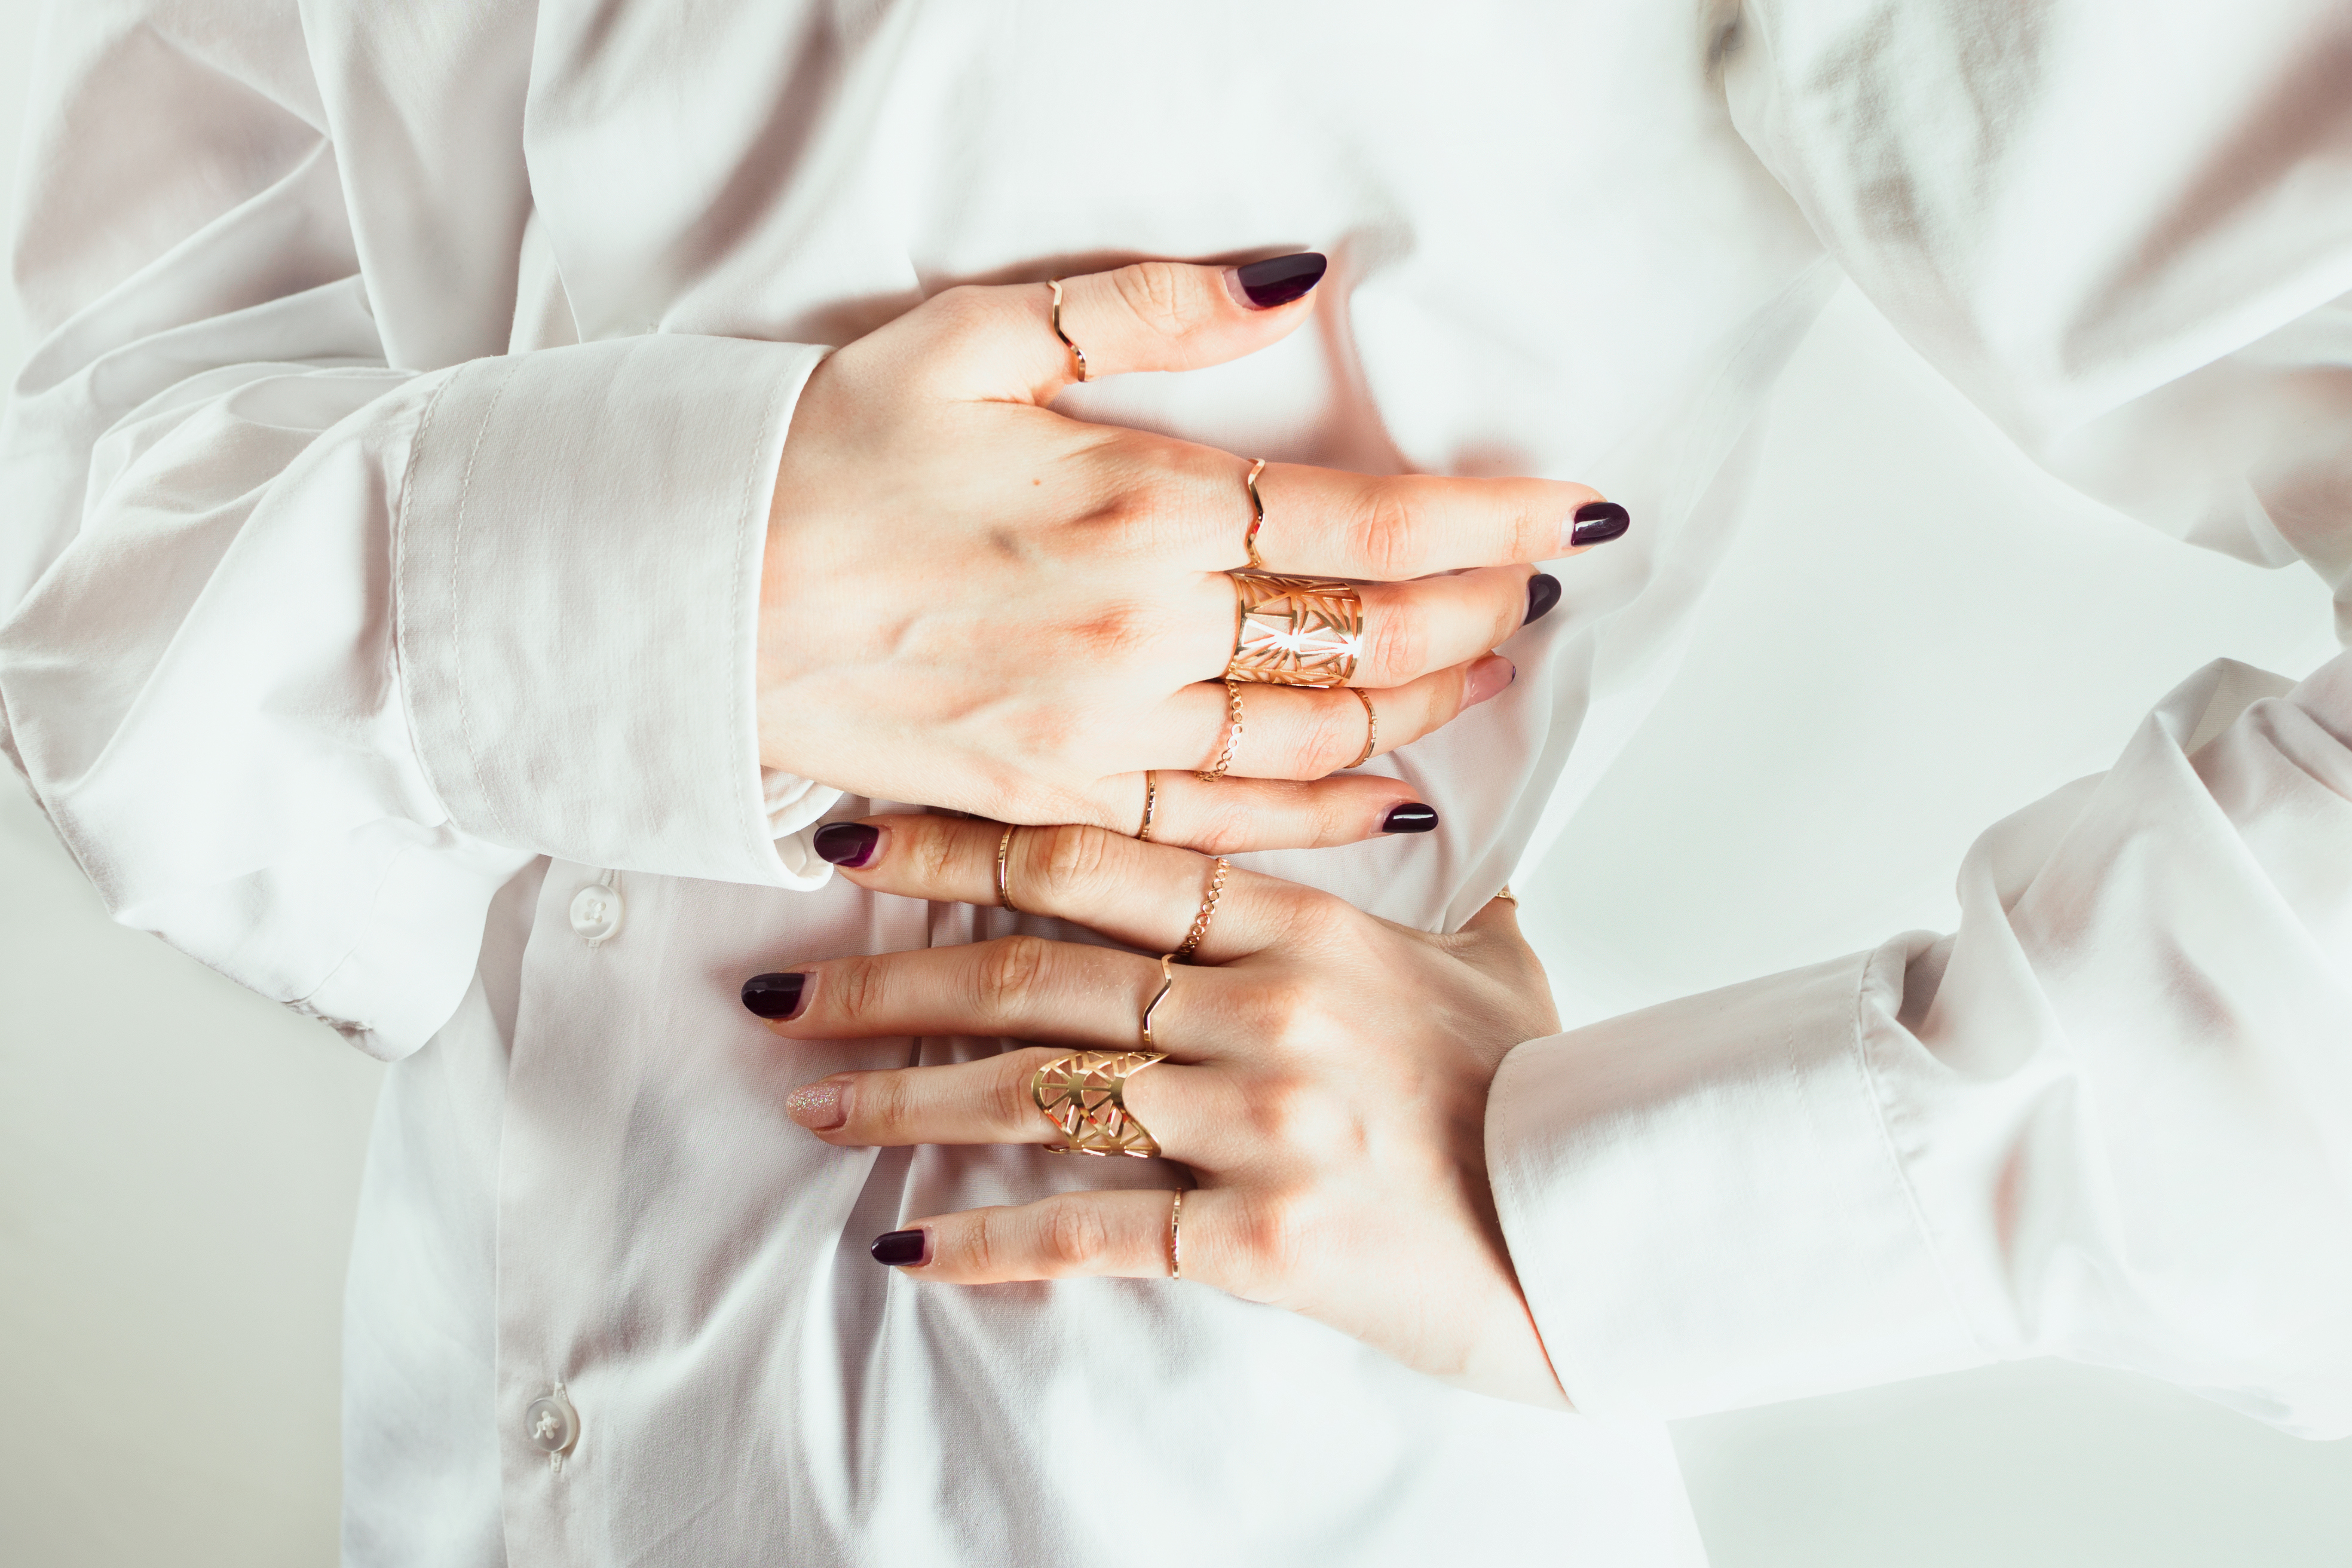 A woman's hands stacked in several gold rings. | Source: Getty Images